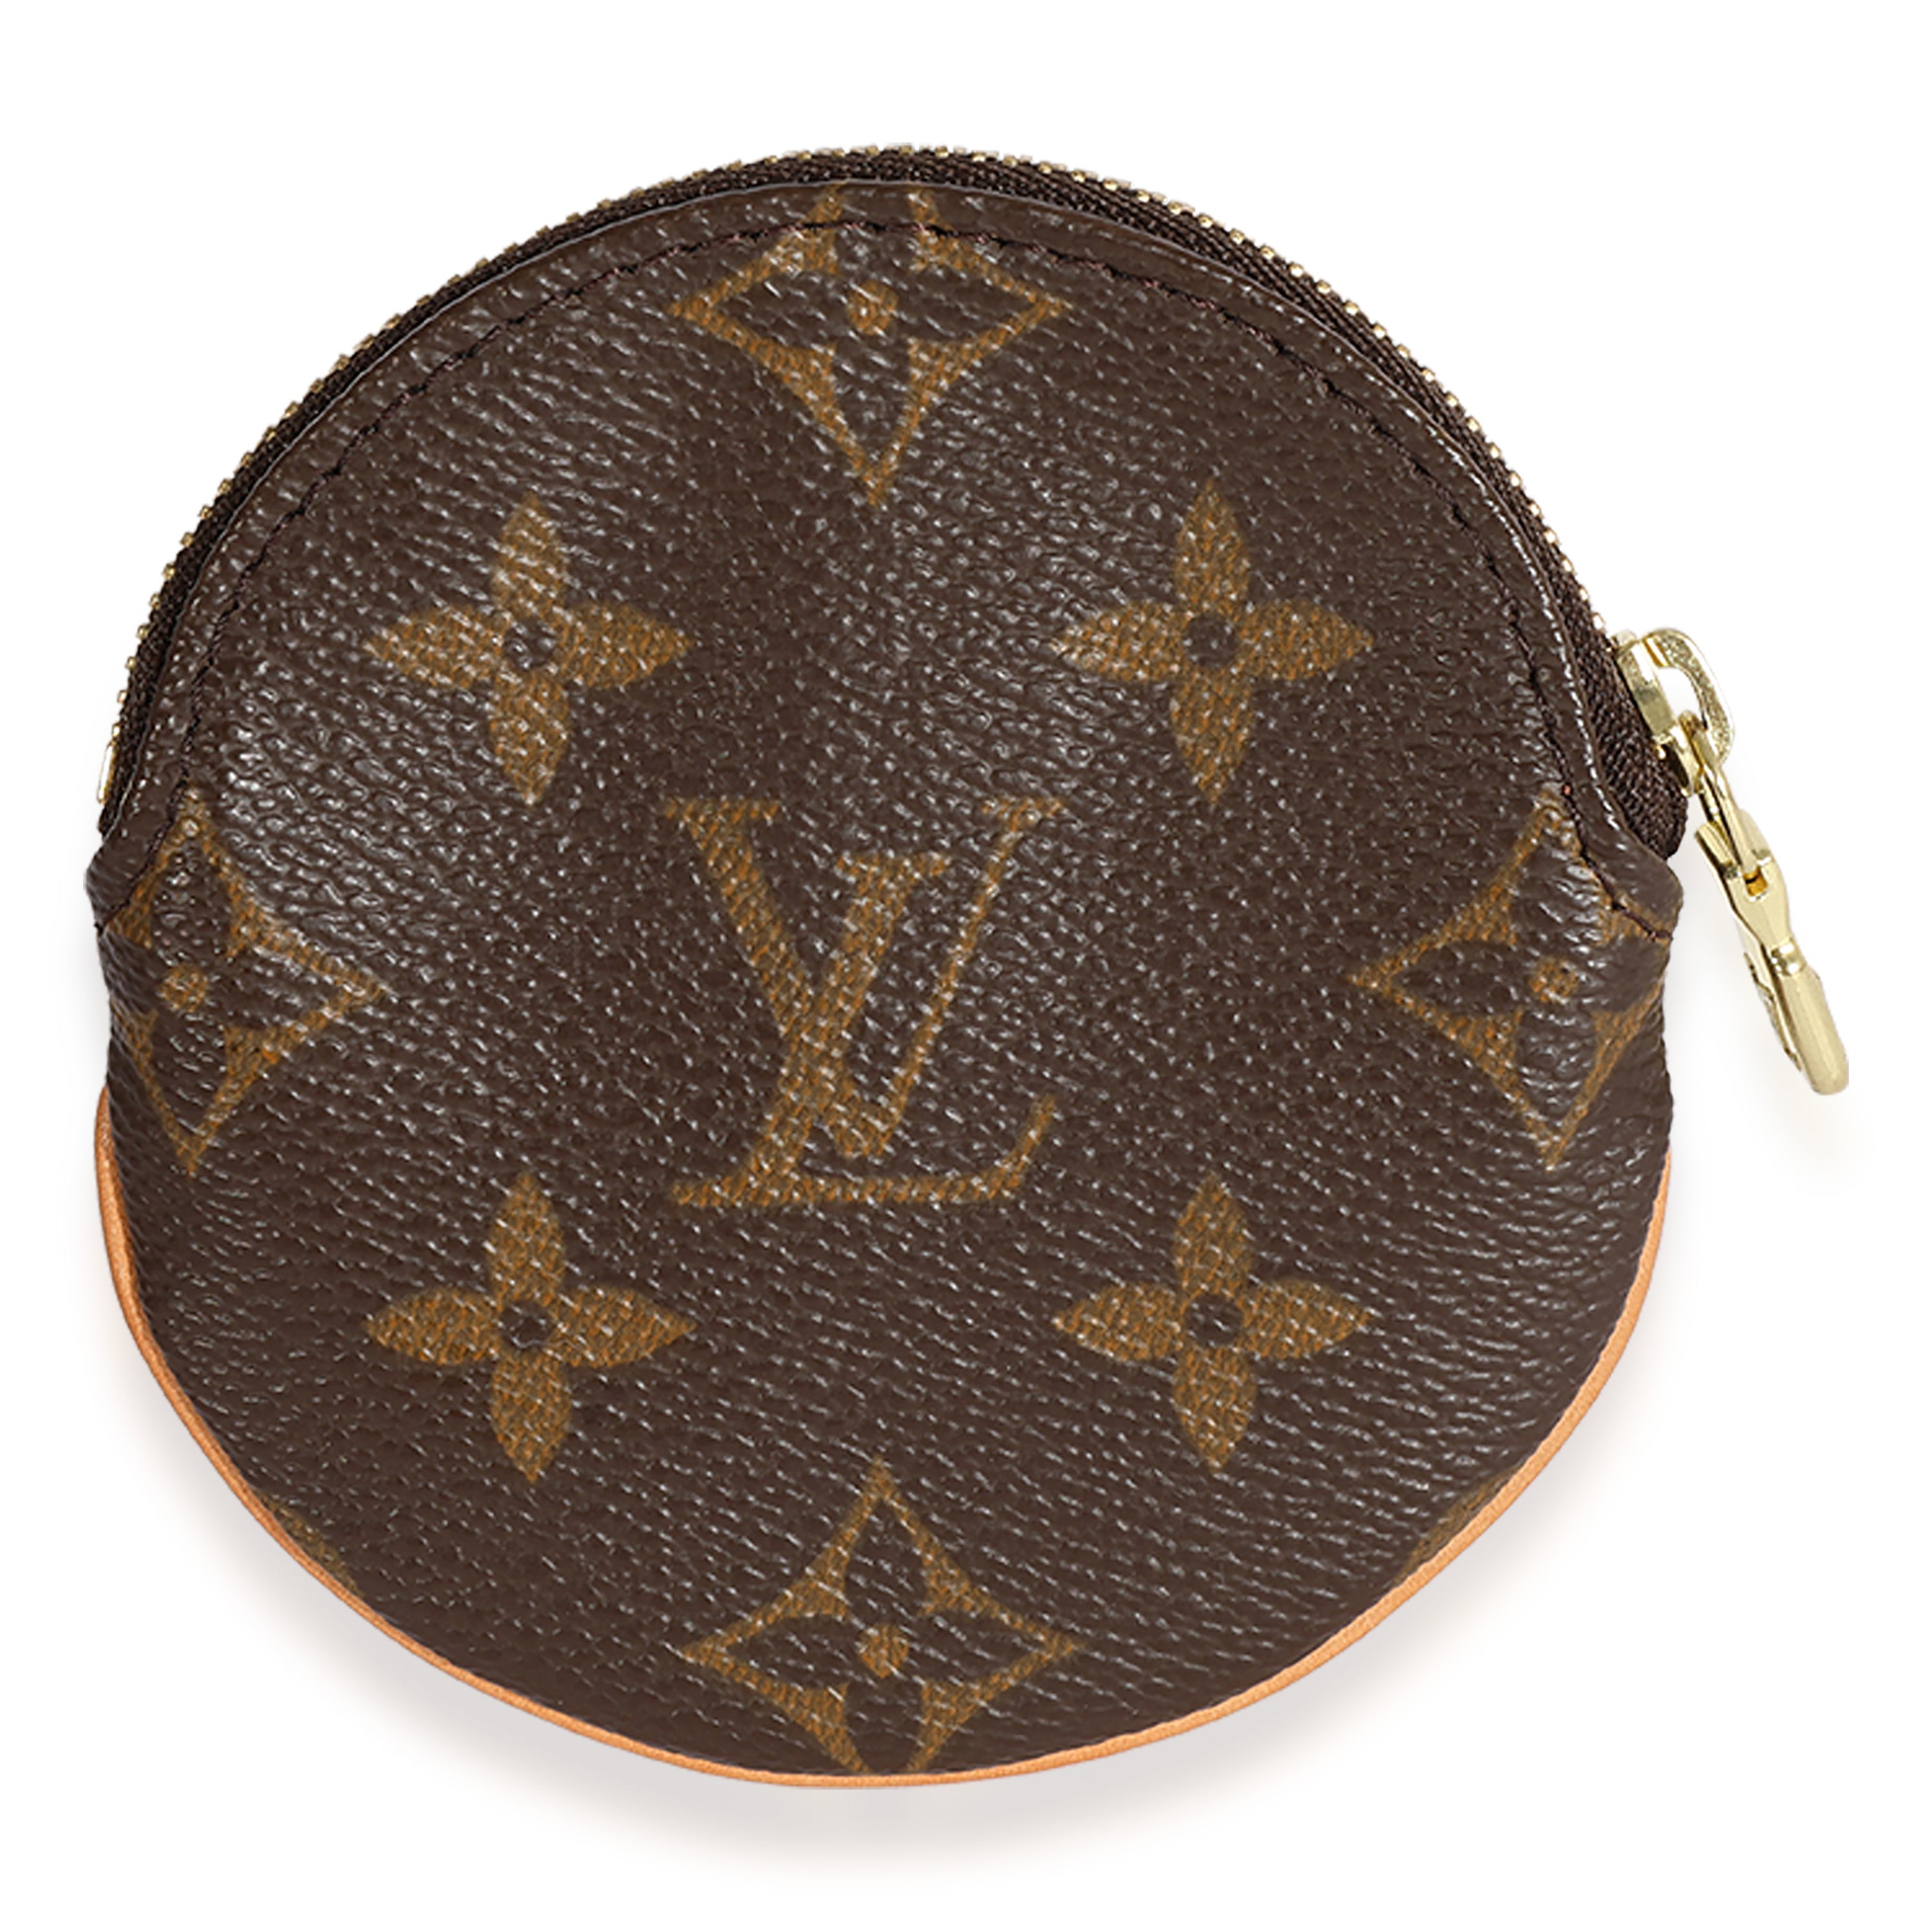 Louis Vuitton round coin purse comparison/What fits inside besides coins? -  YouTube